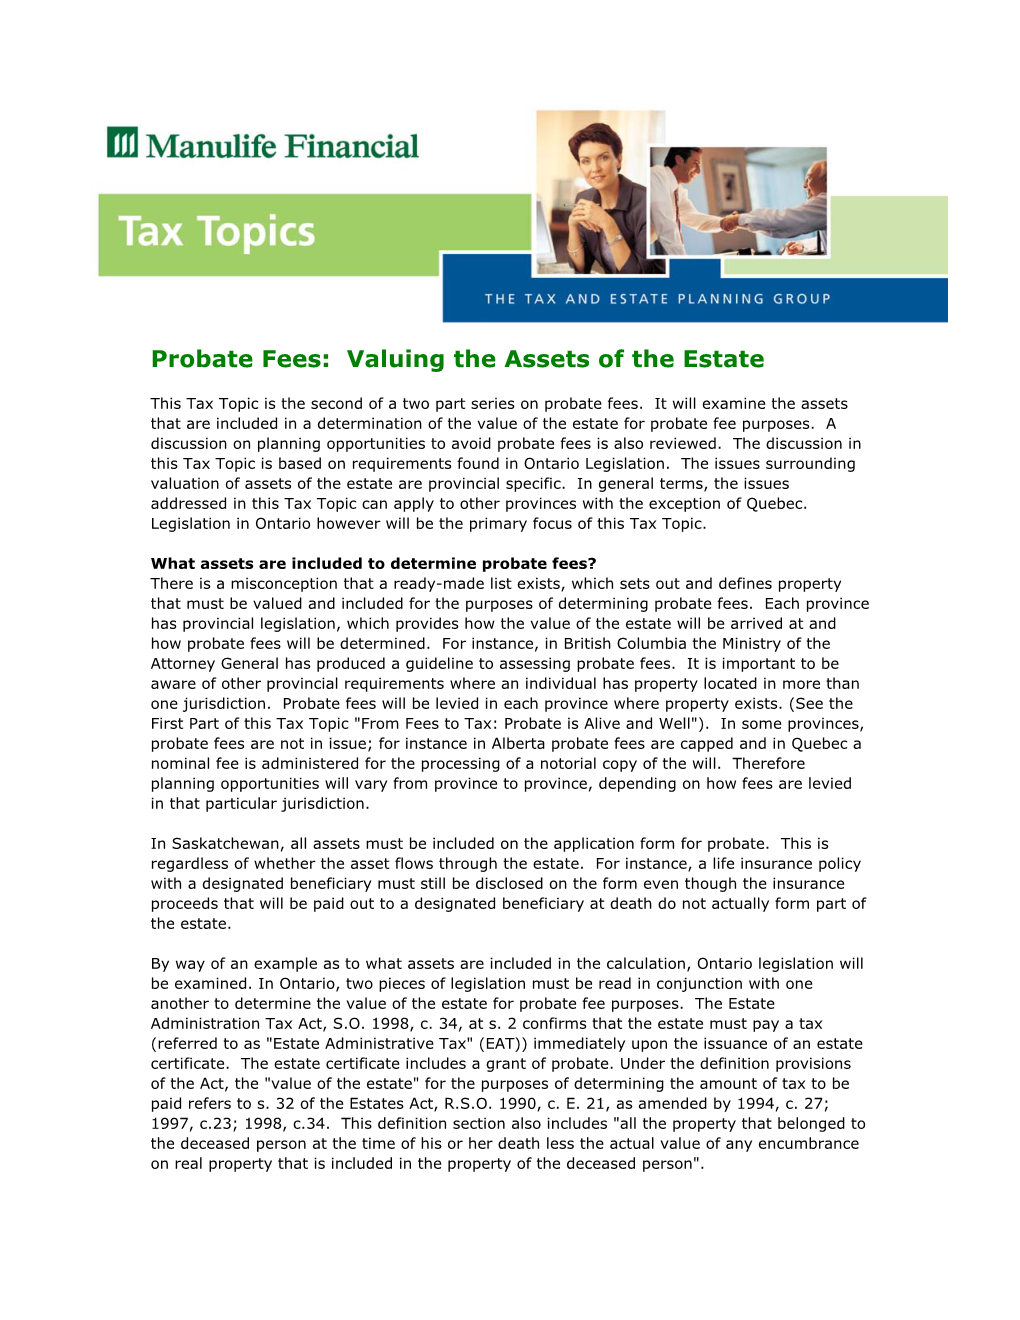 Probate Fees: Valuing the Assets of the Estate